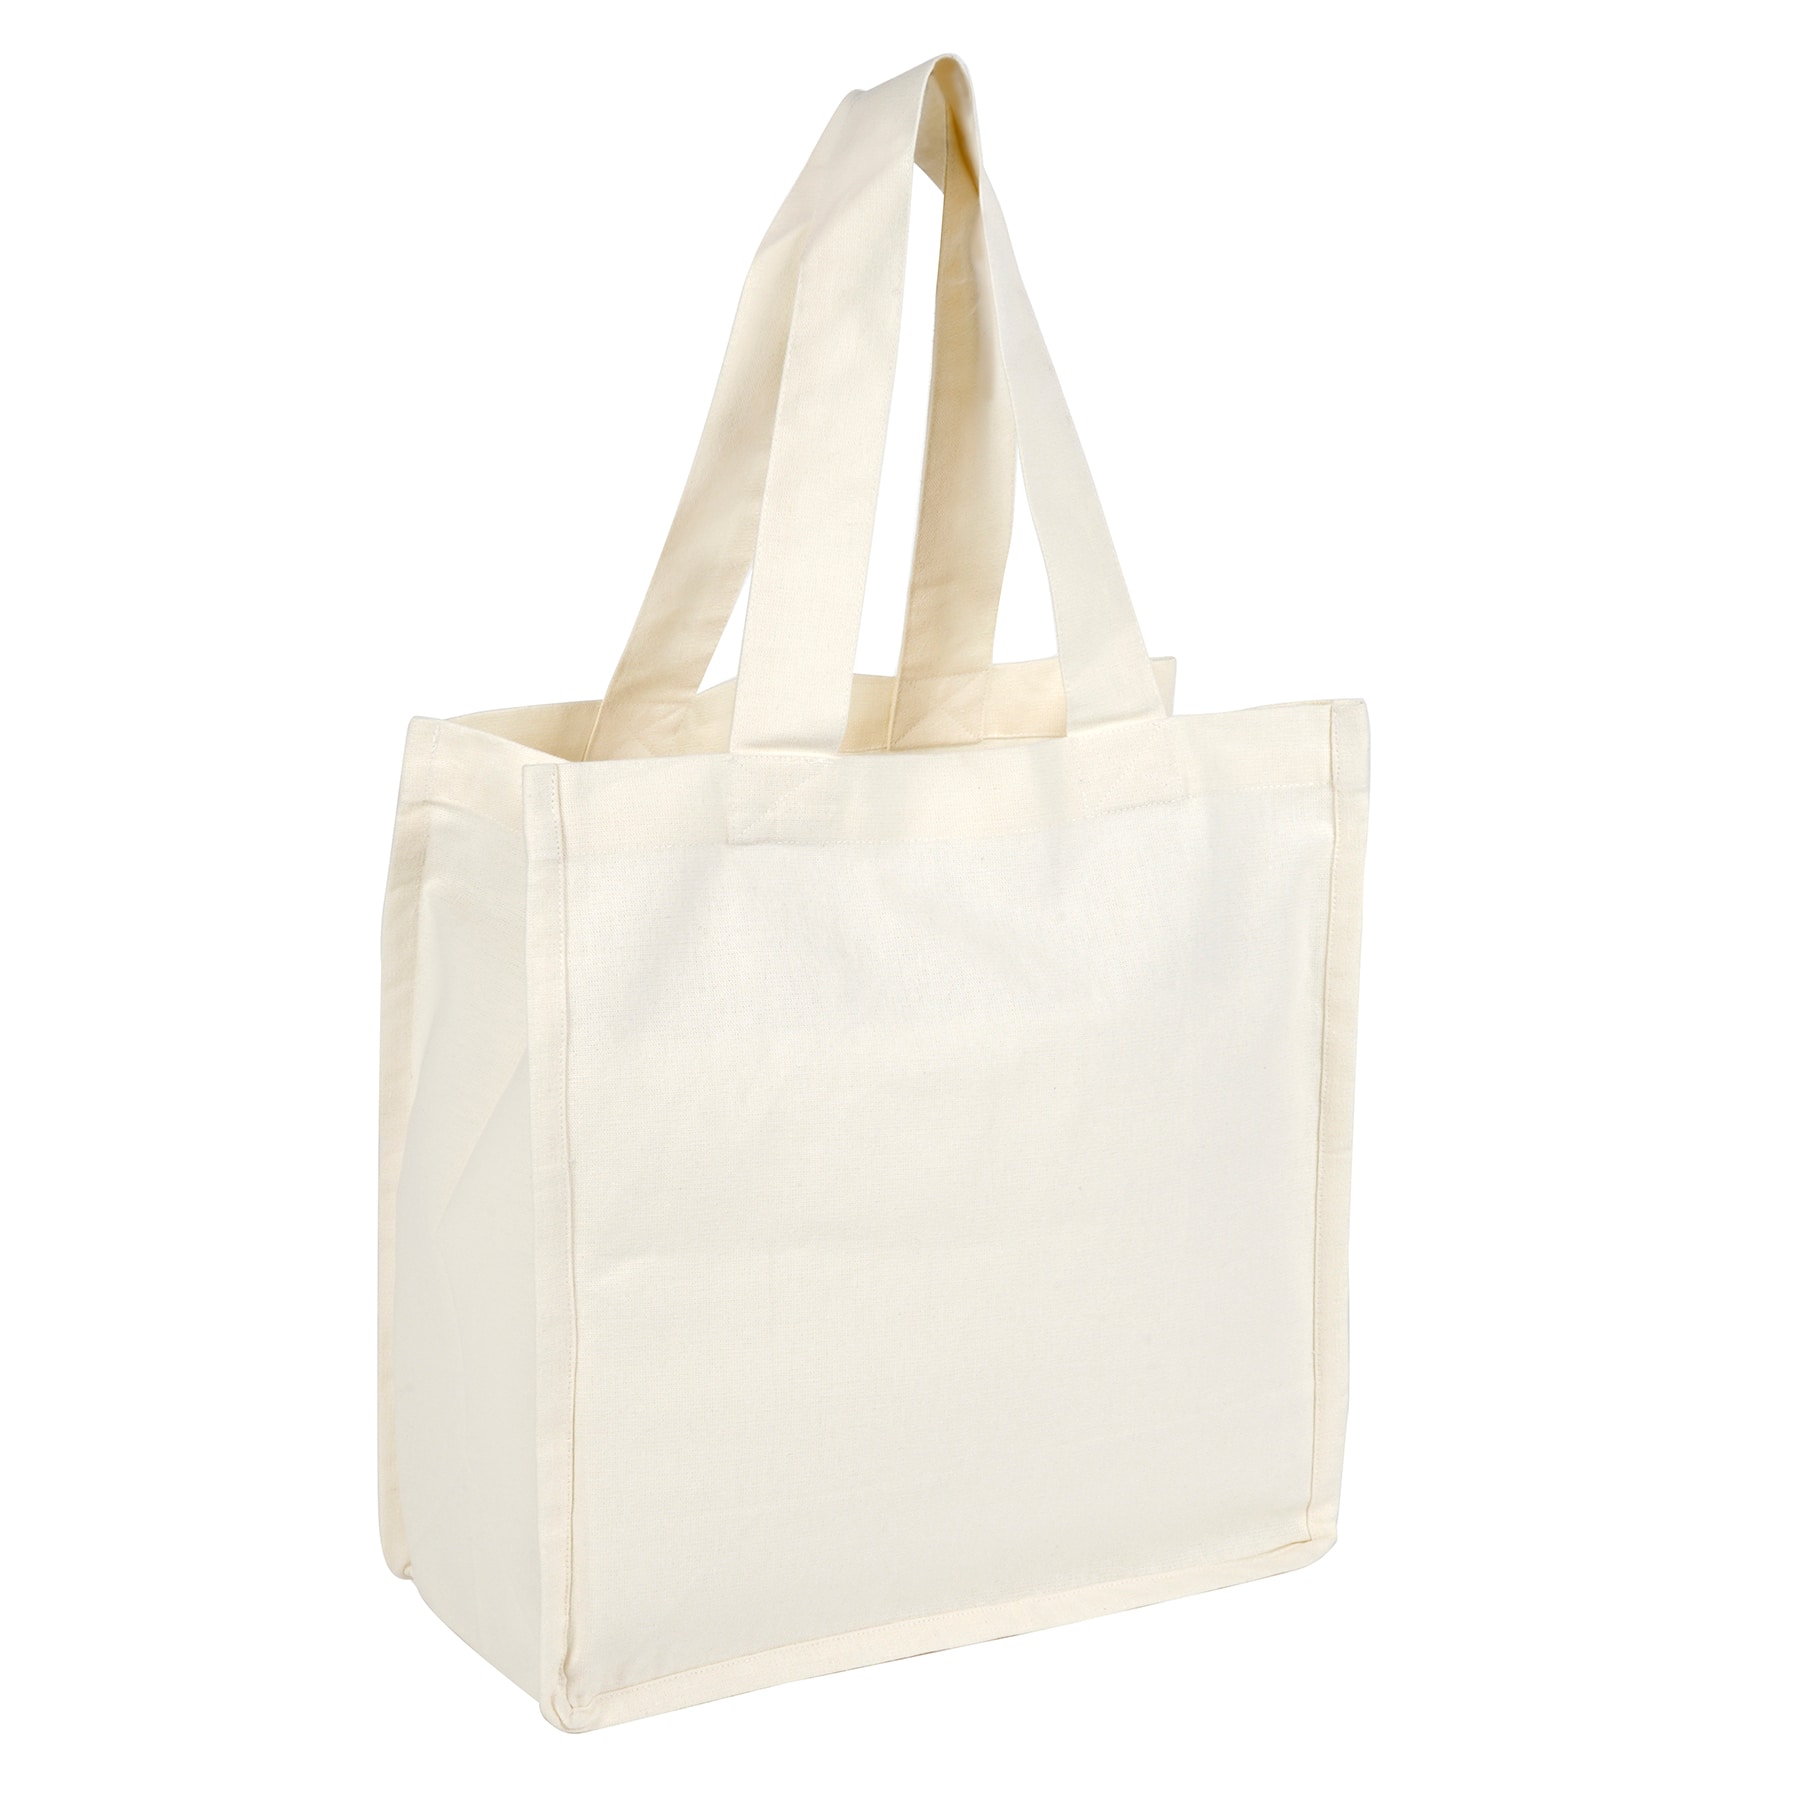 Shop Durable and Long-Lasting Canvas Tote Bag